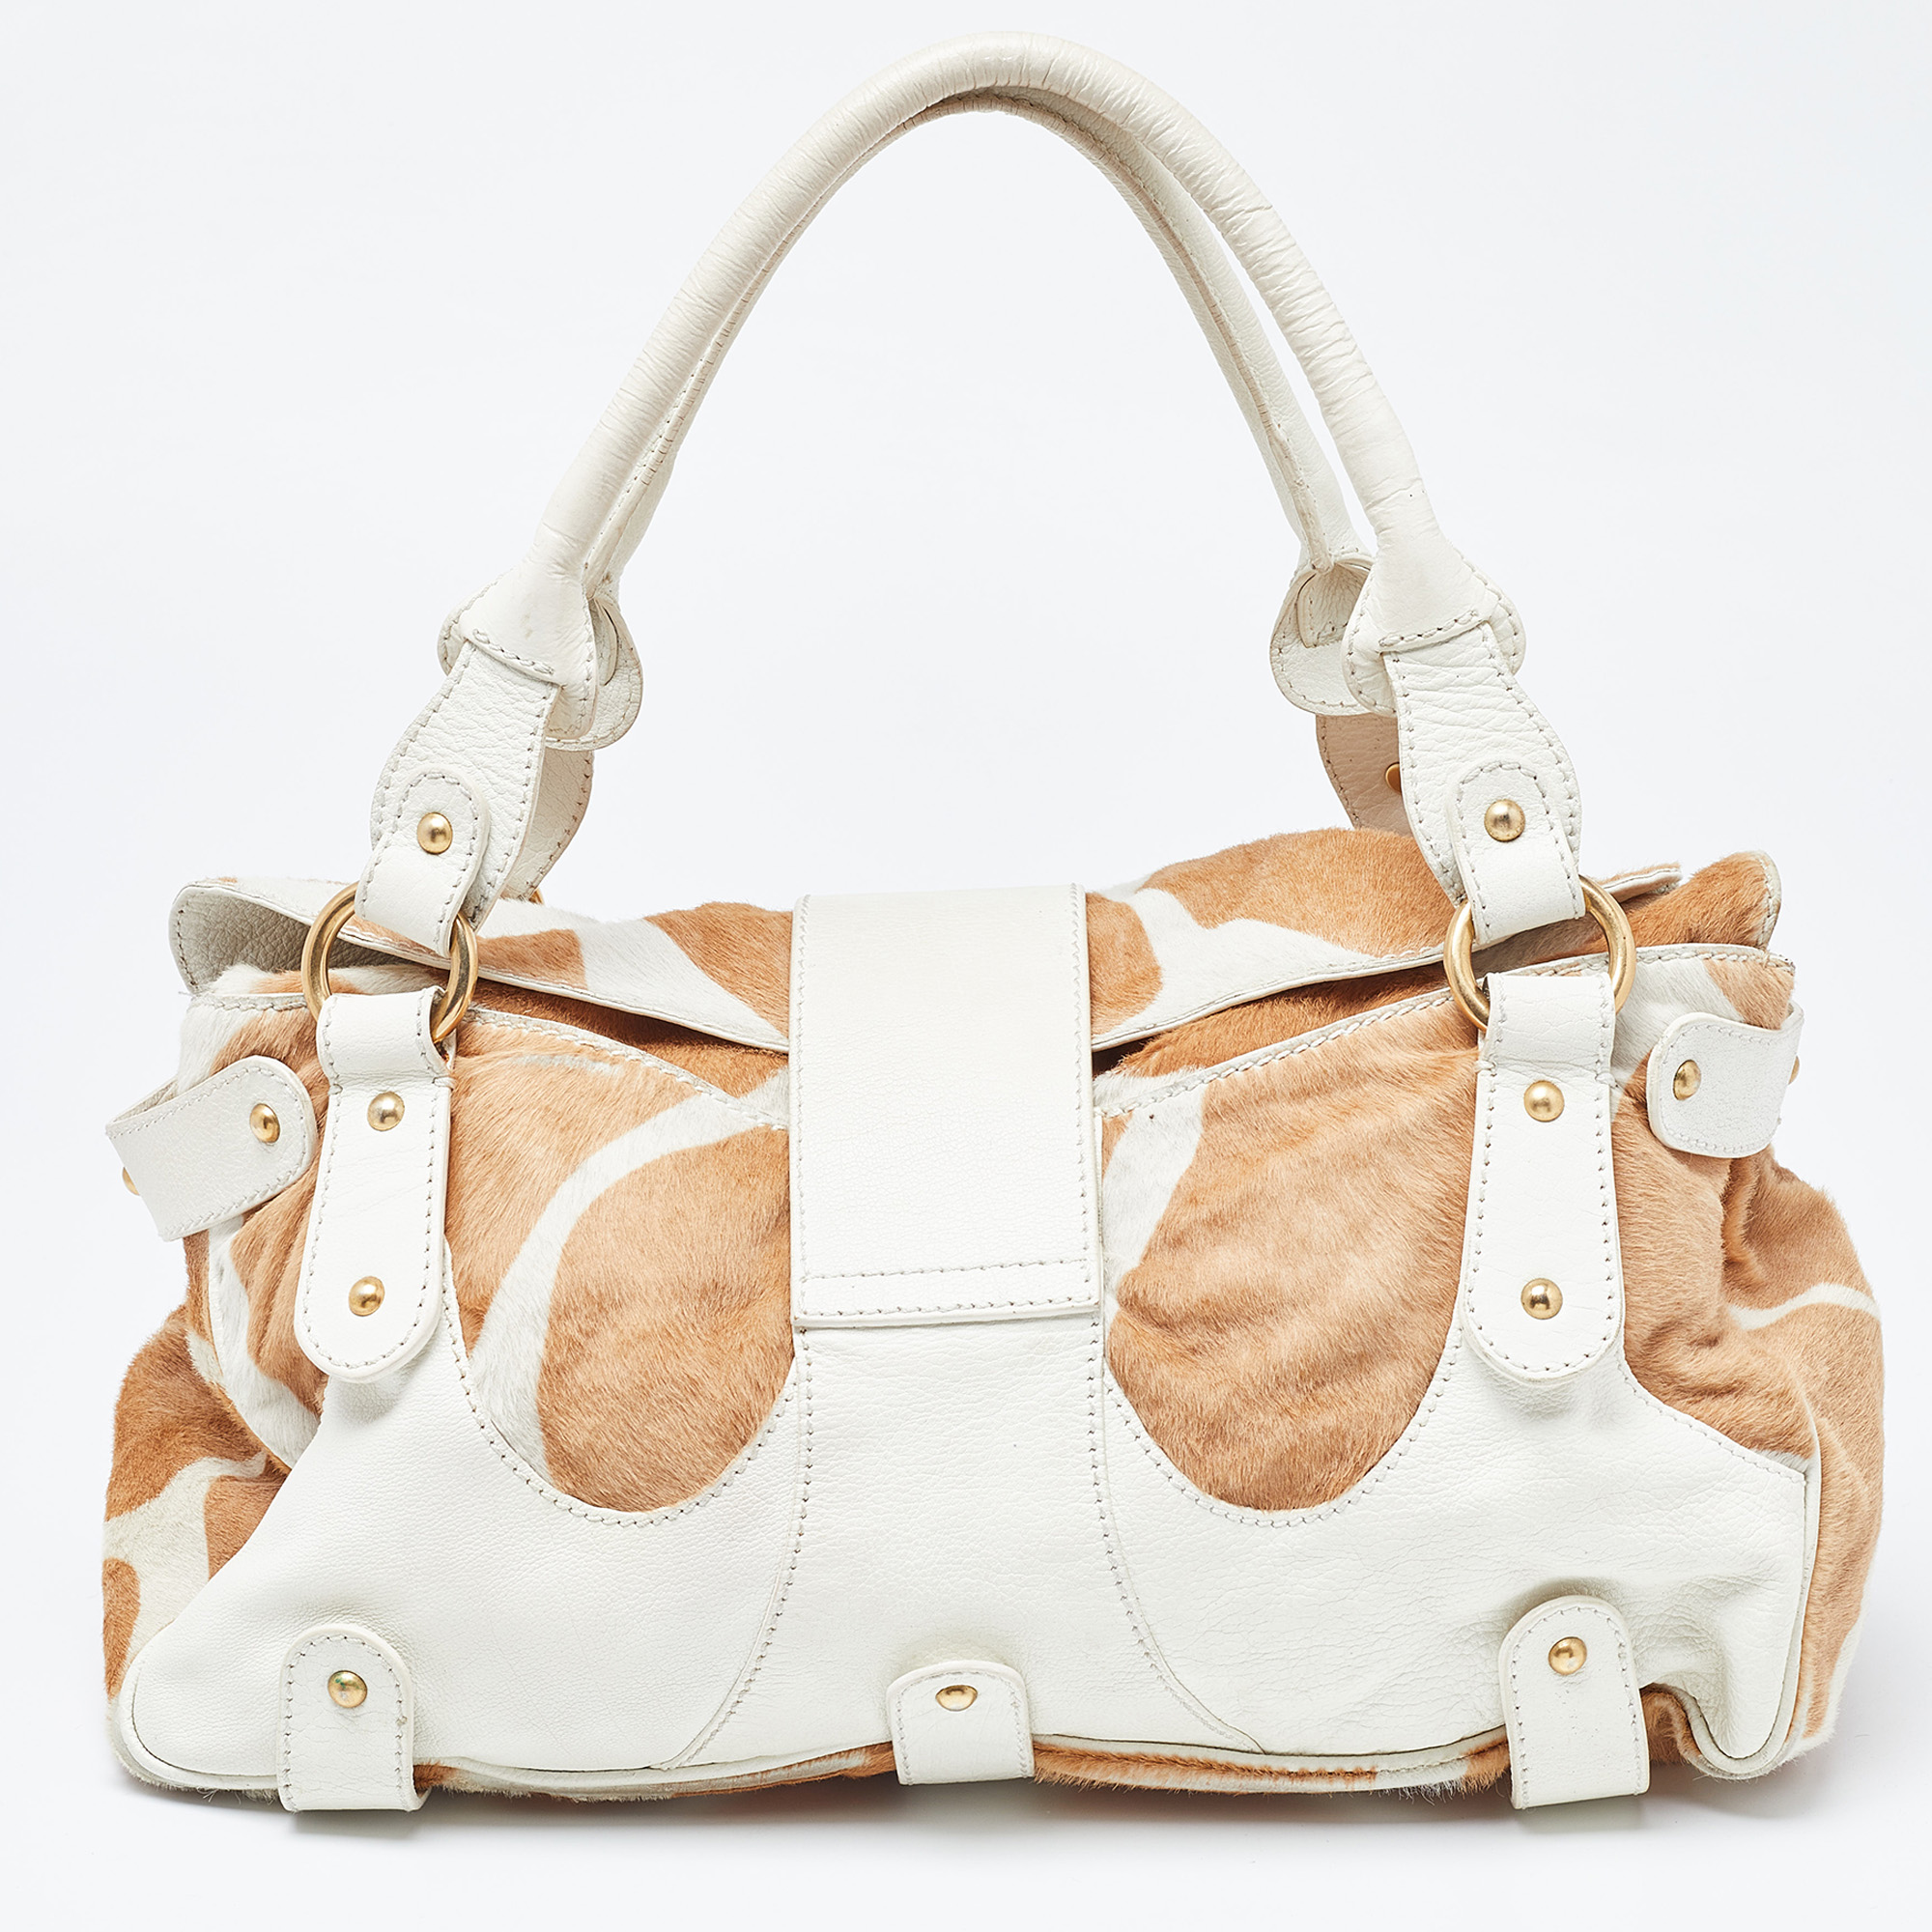 Valentino Beige/White Calfhair And Leather VLogo Satchel